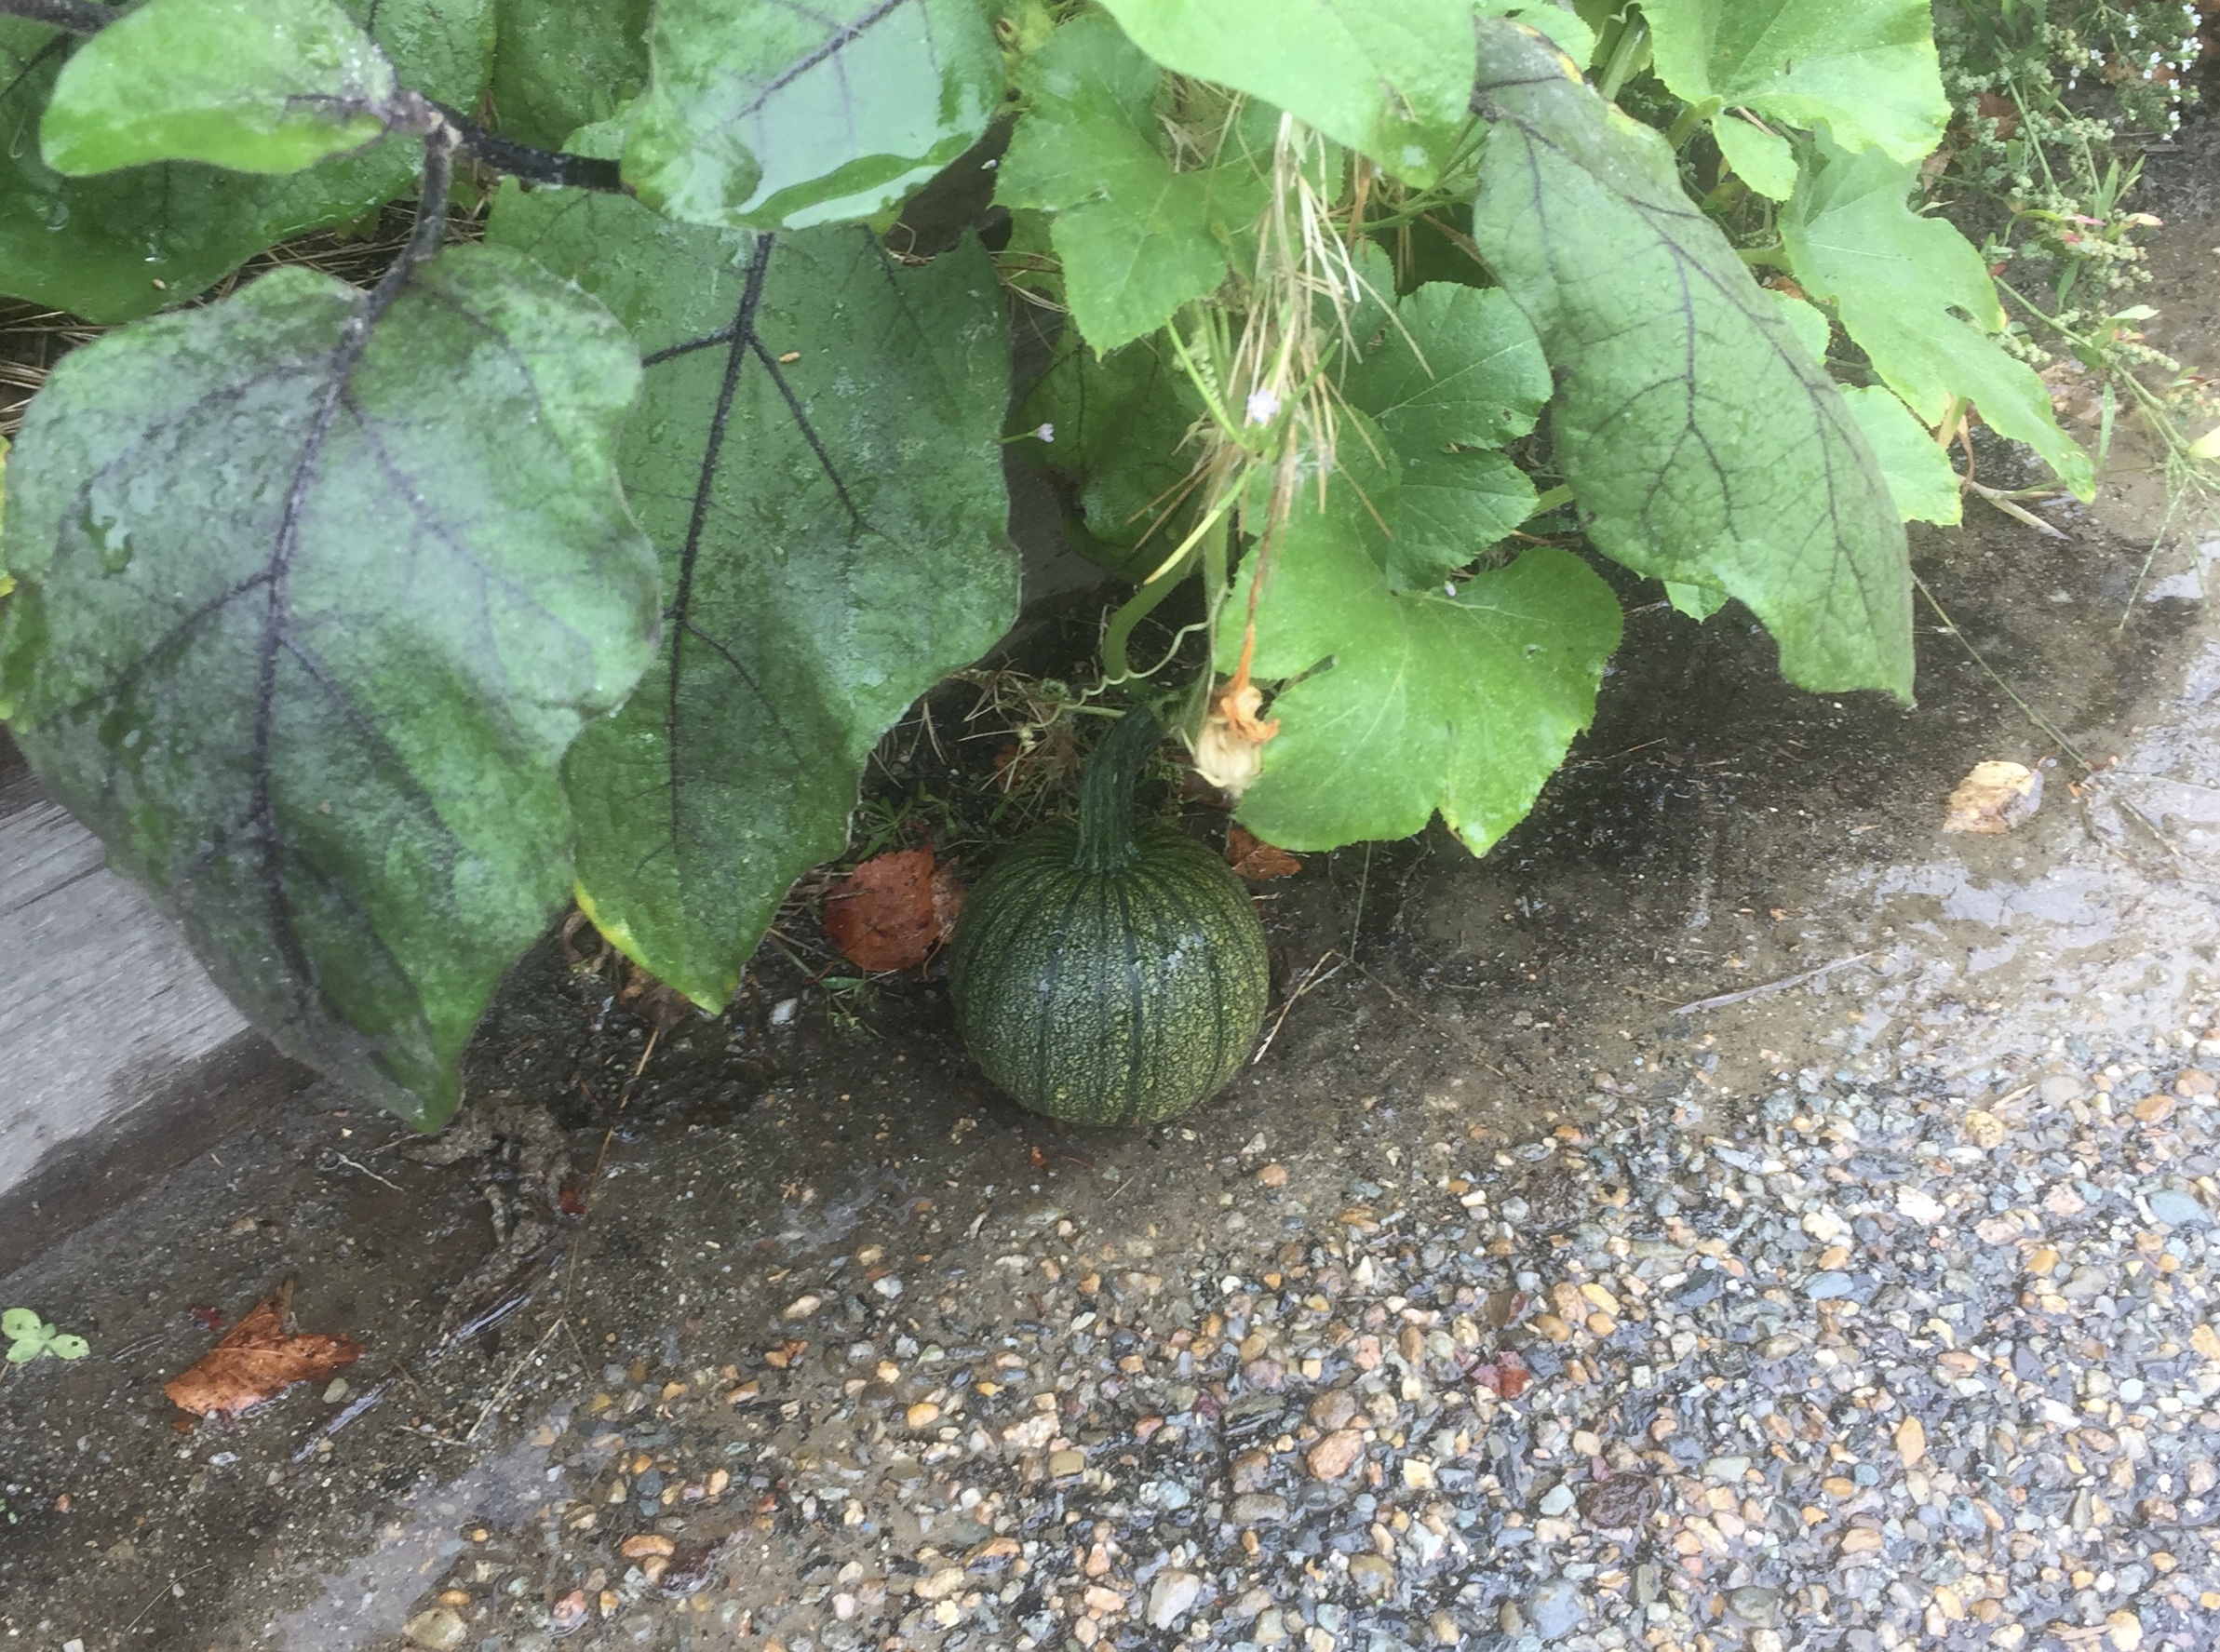 What can we do with this pumpkin?